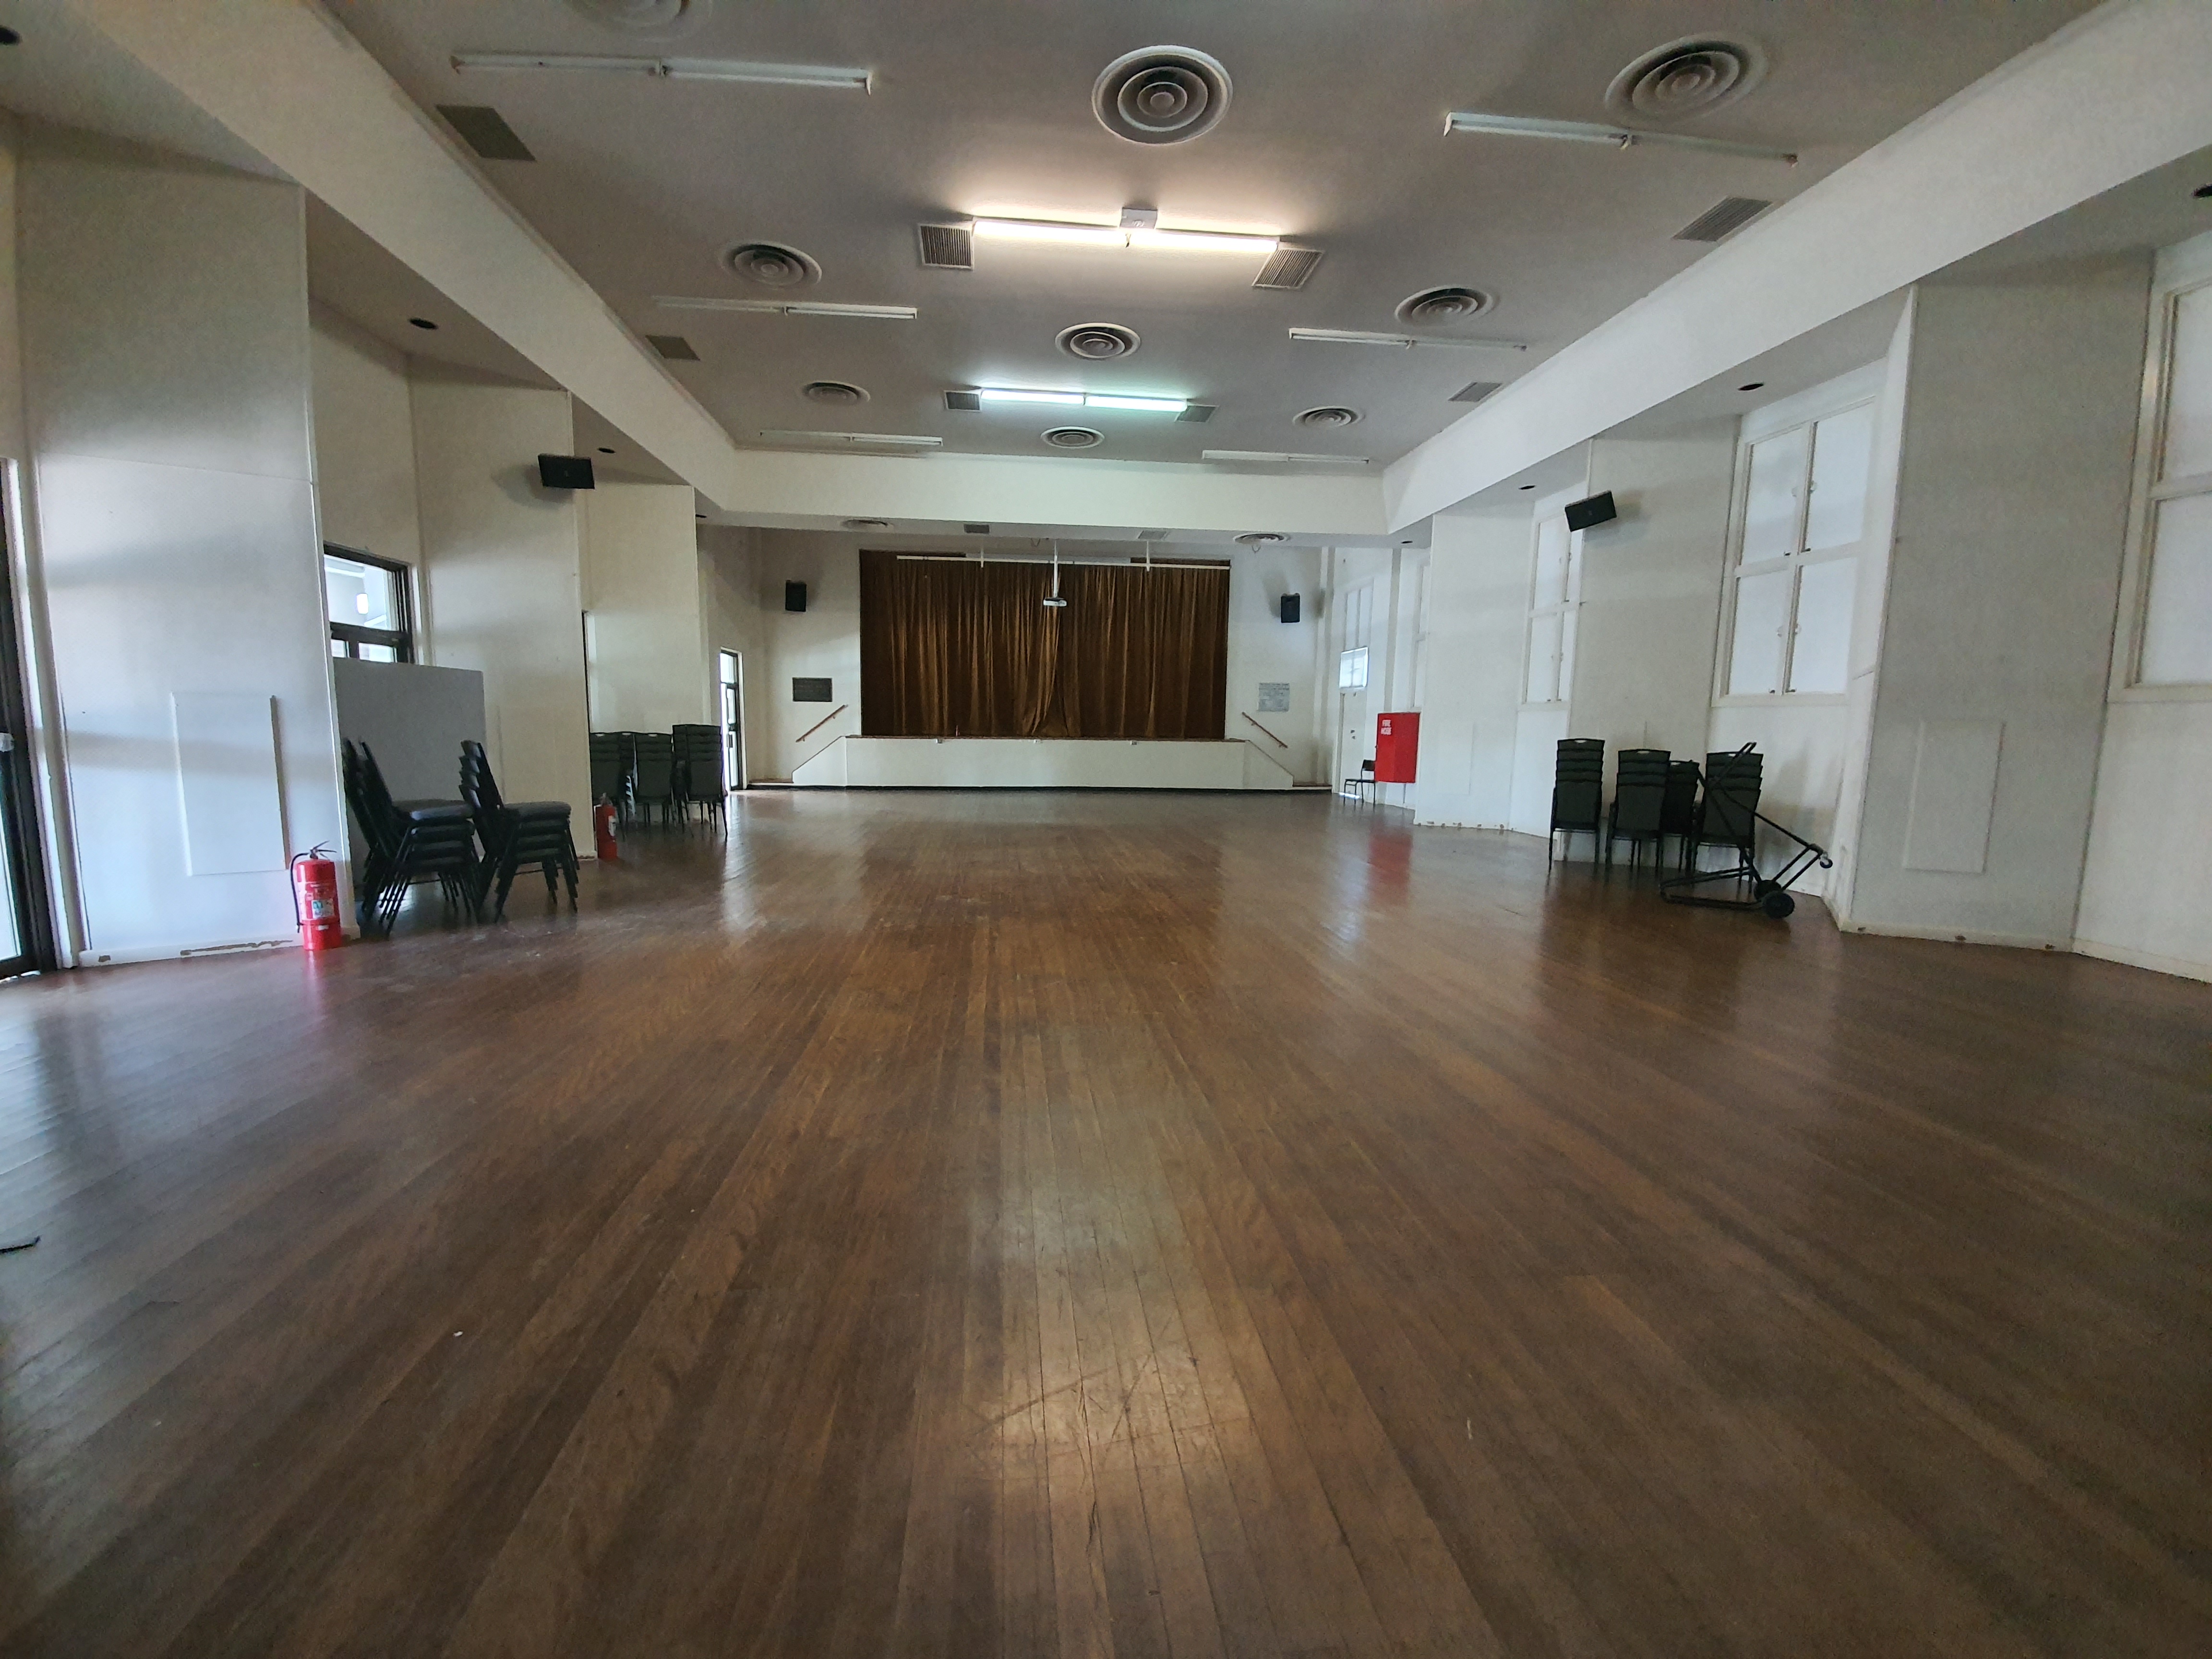 St George Cultural Centre Hall 1